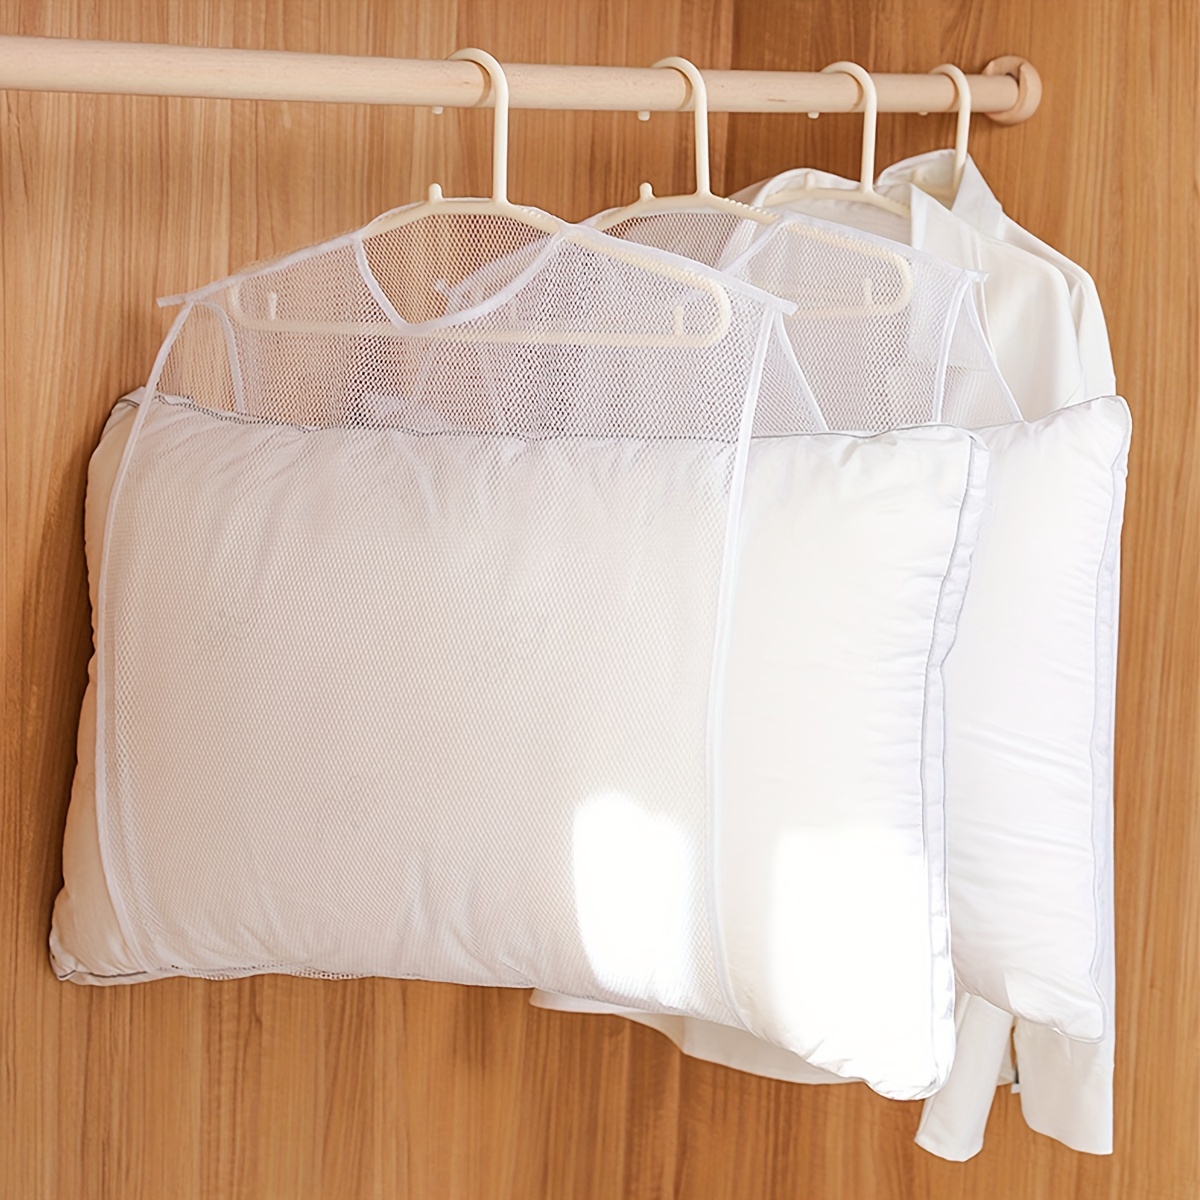 1pc Windproof Pillow Drying Net, Is Used For Drying Clothes, Socks,  Pillows, Dolls, Large Items, And Other, Household Drying Bags For Outside  Balcony